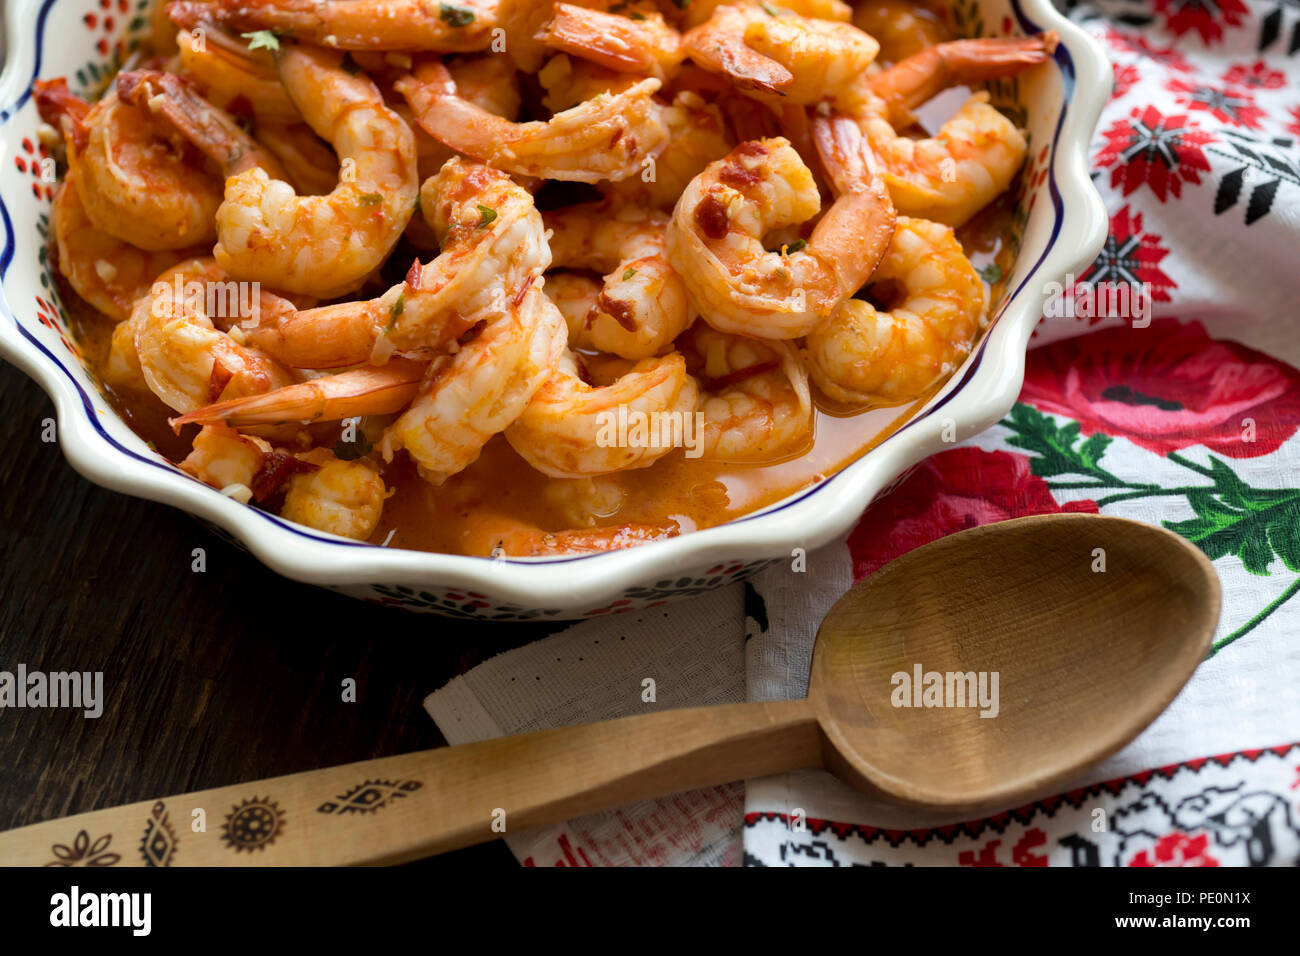 Juicy appetizing Shrimps cooked and baked in sauce are displayed on a wooden table in a dish with ornament located next to a towel with colorful ornam Stock Photo